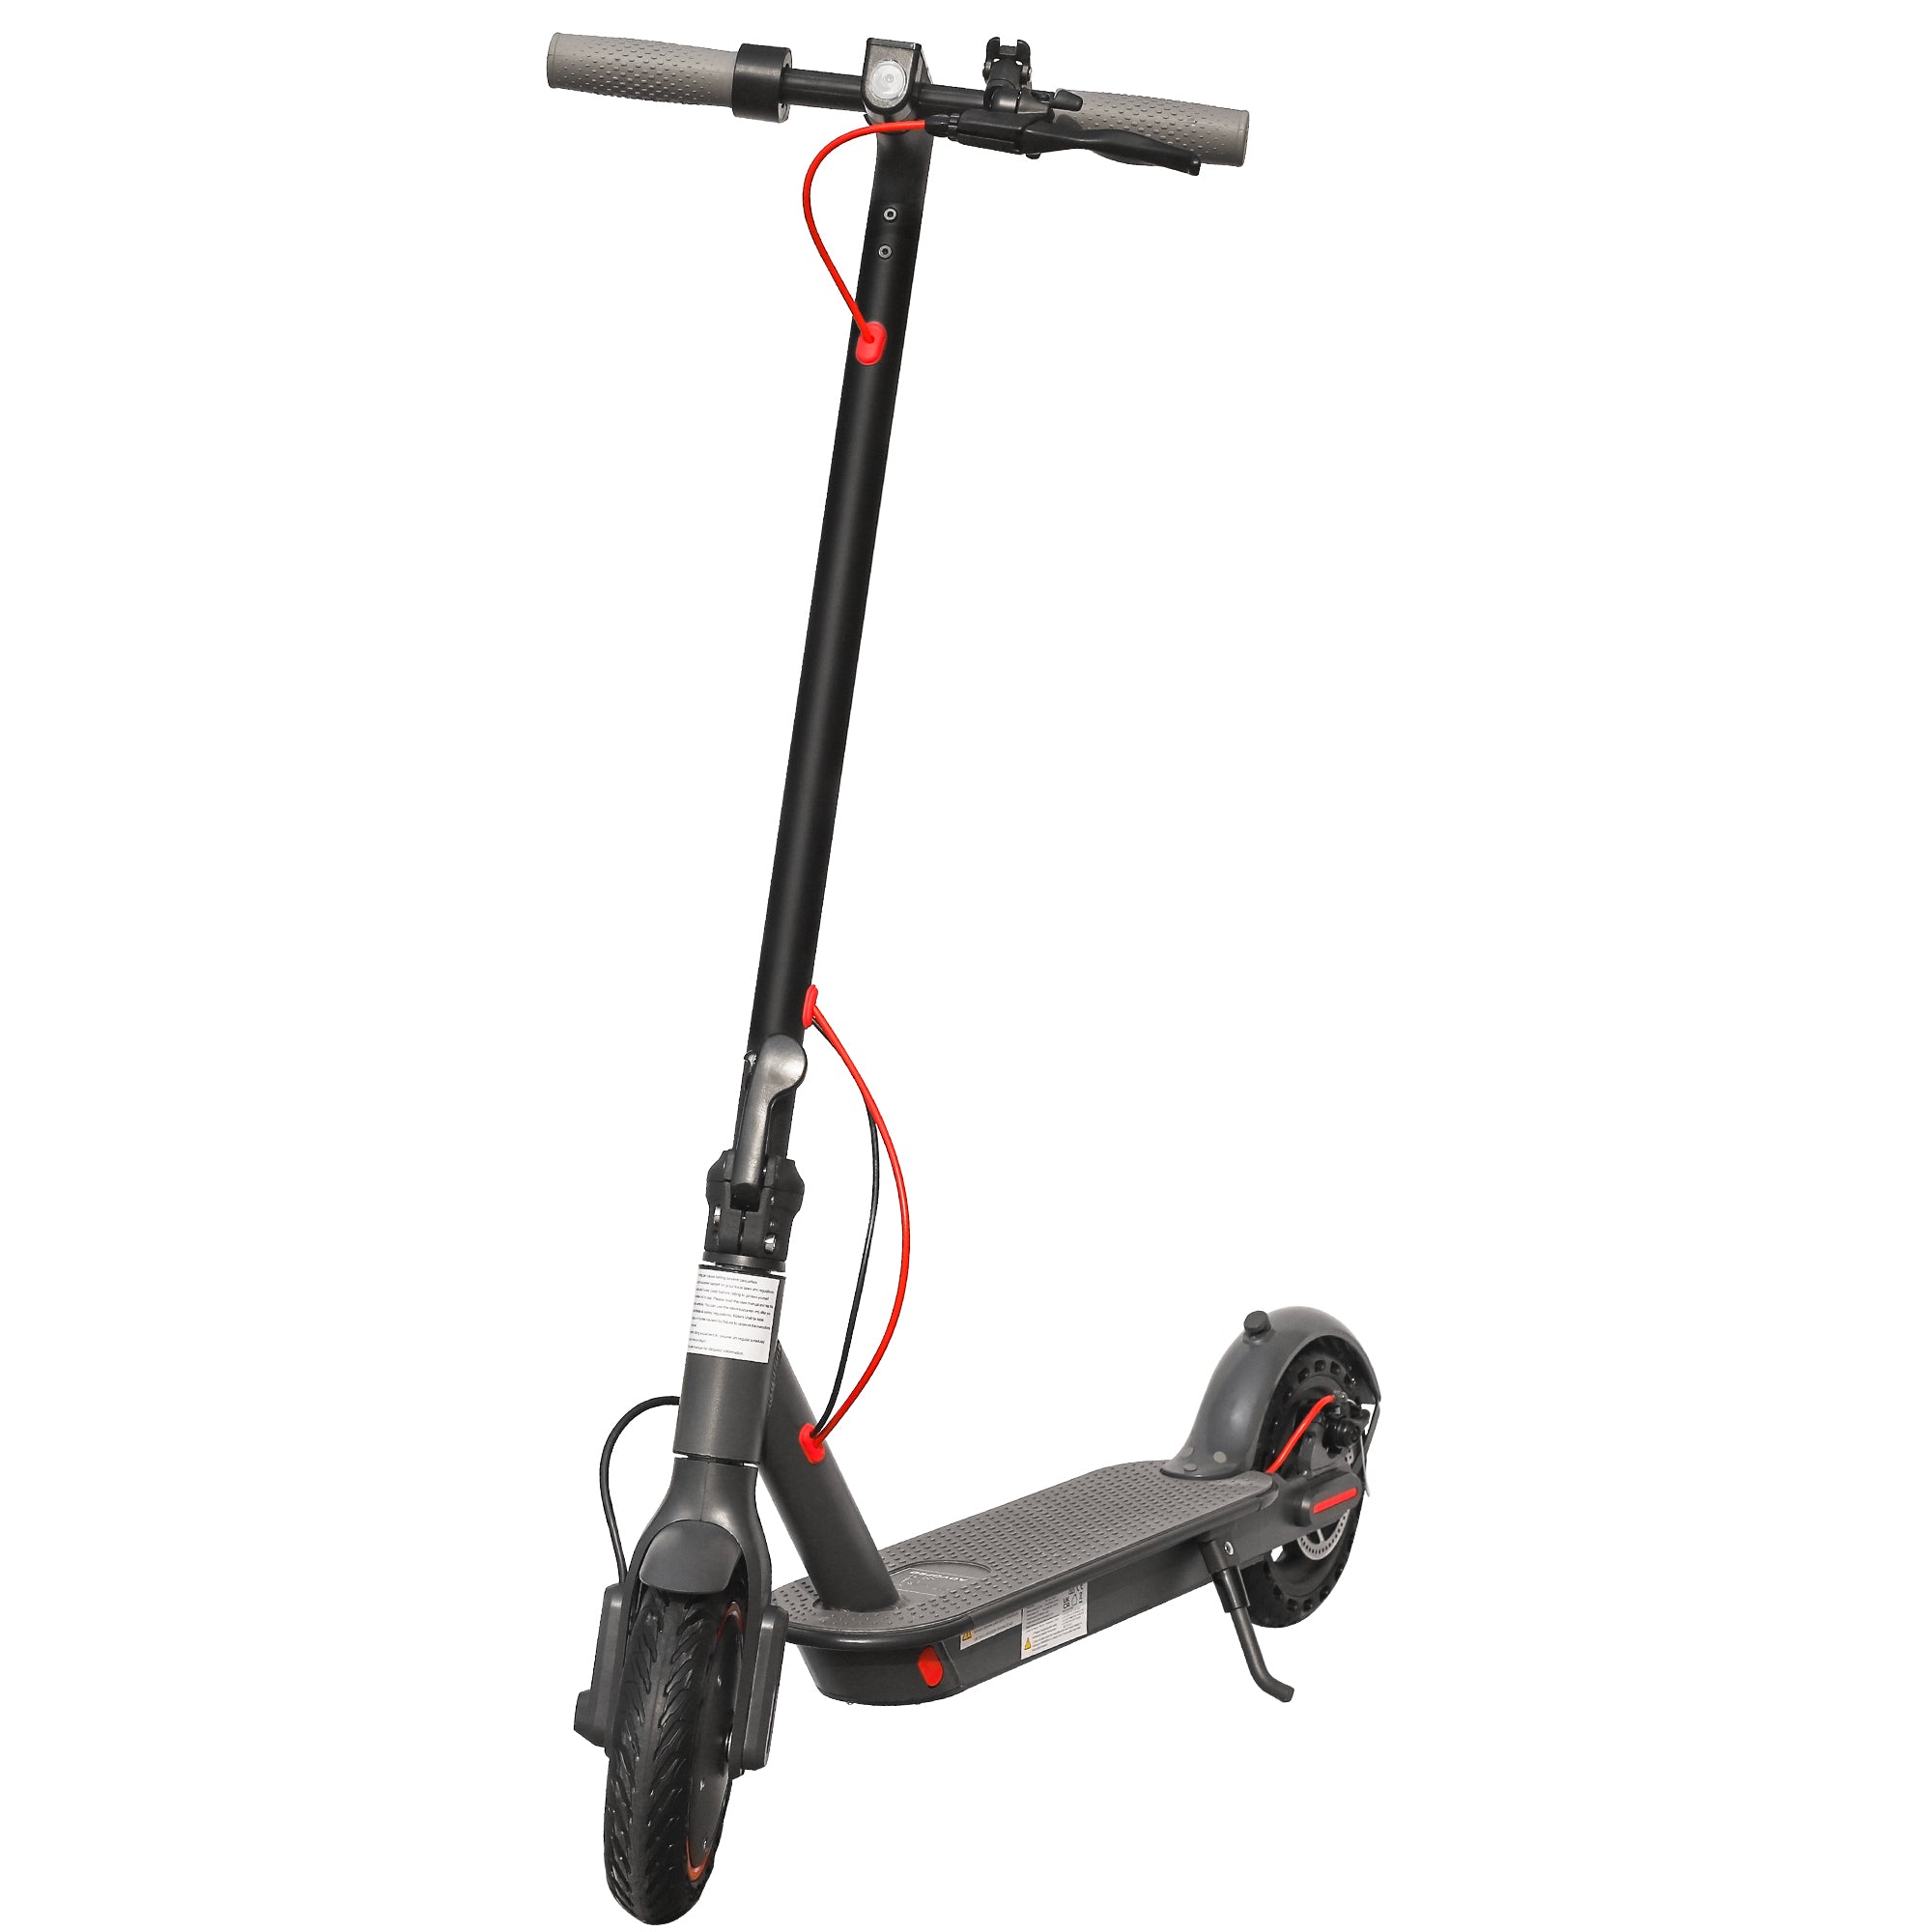 AOVOPRO ES80-M365PRO E-Scooter with 2 Wheels IP-65 Waterproof,350W Motor,8.5"Tire